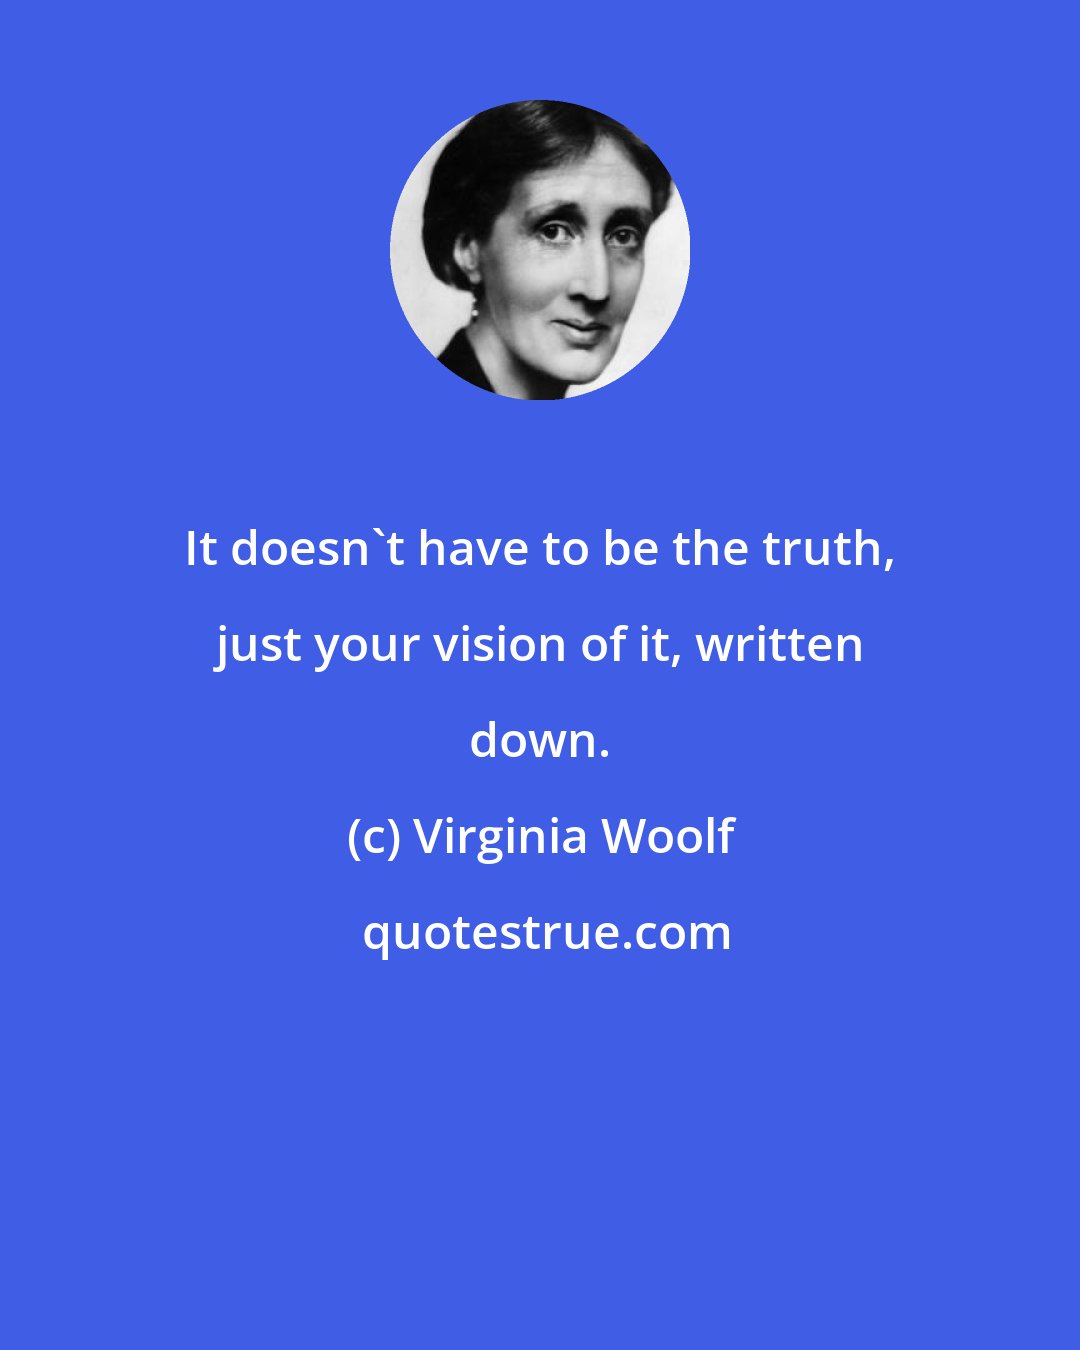 Virginia Woolf: It doesn't have to be the truth, just your vision of it, written down.